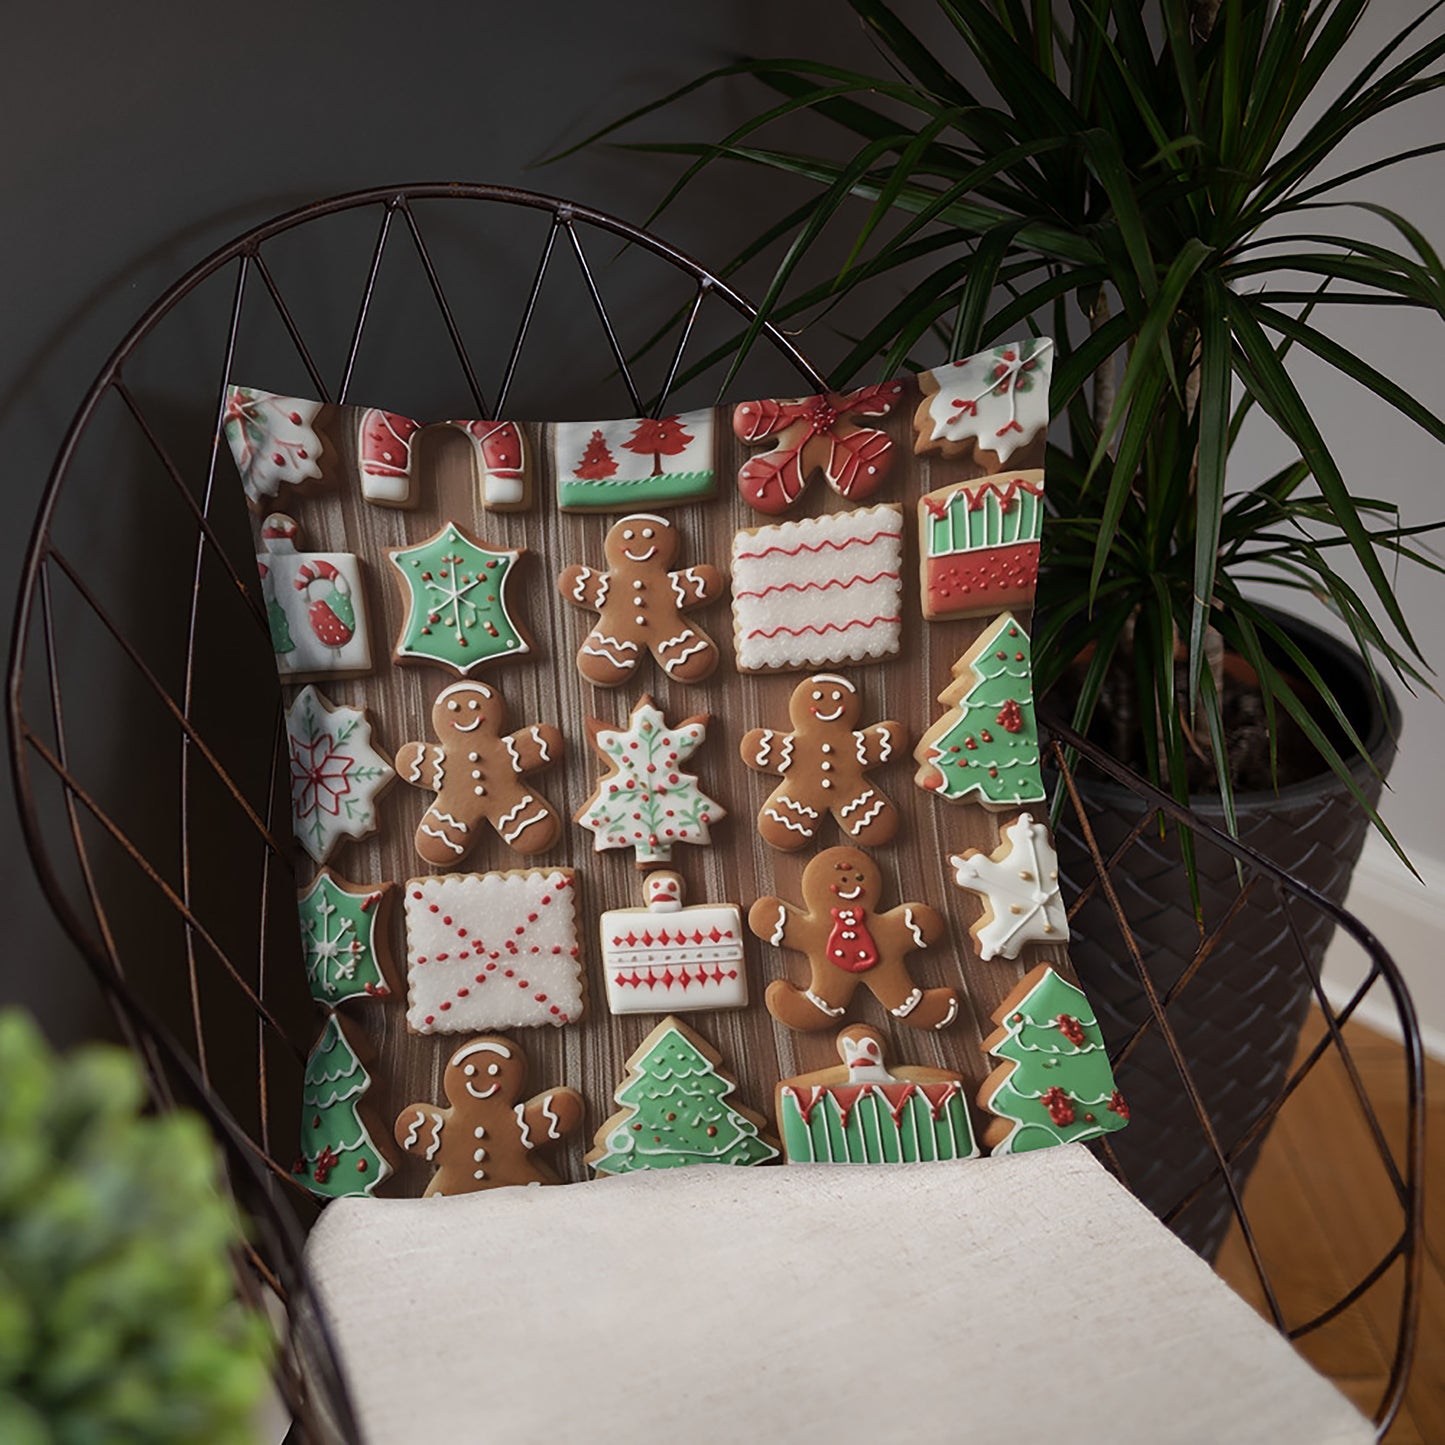 Christmas Throw Pillow Festive Frosted Cookie Delight Polyester Decorative Cushion 18x18